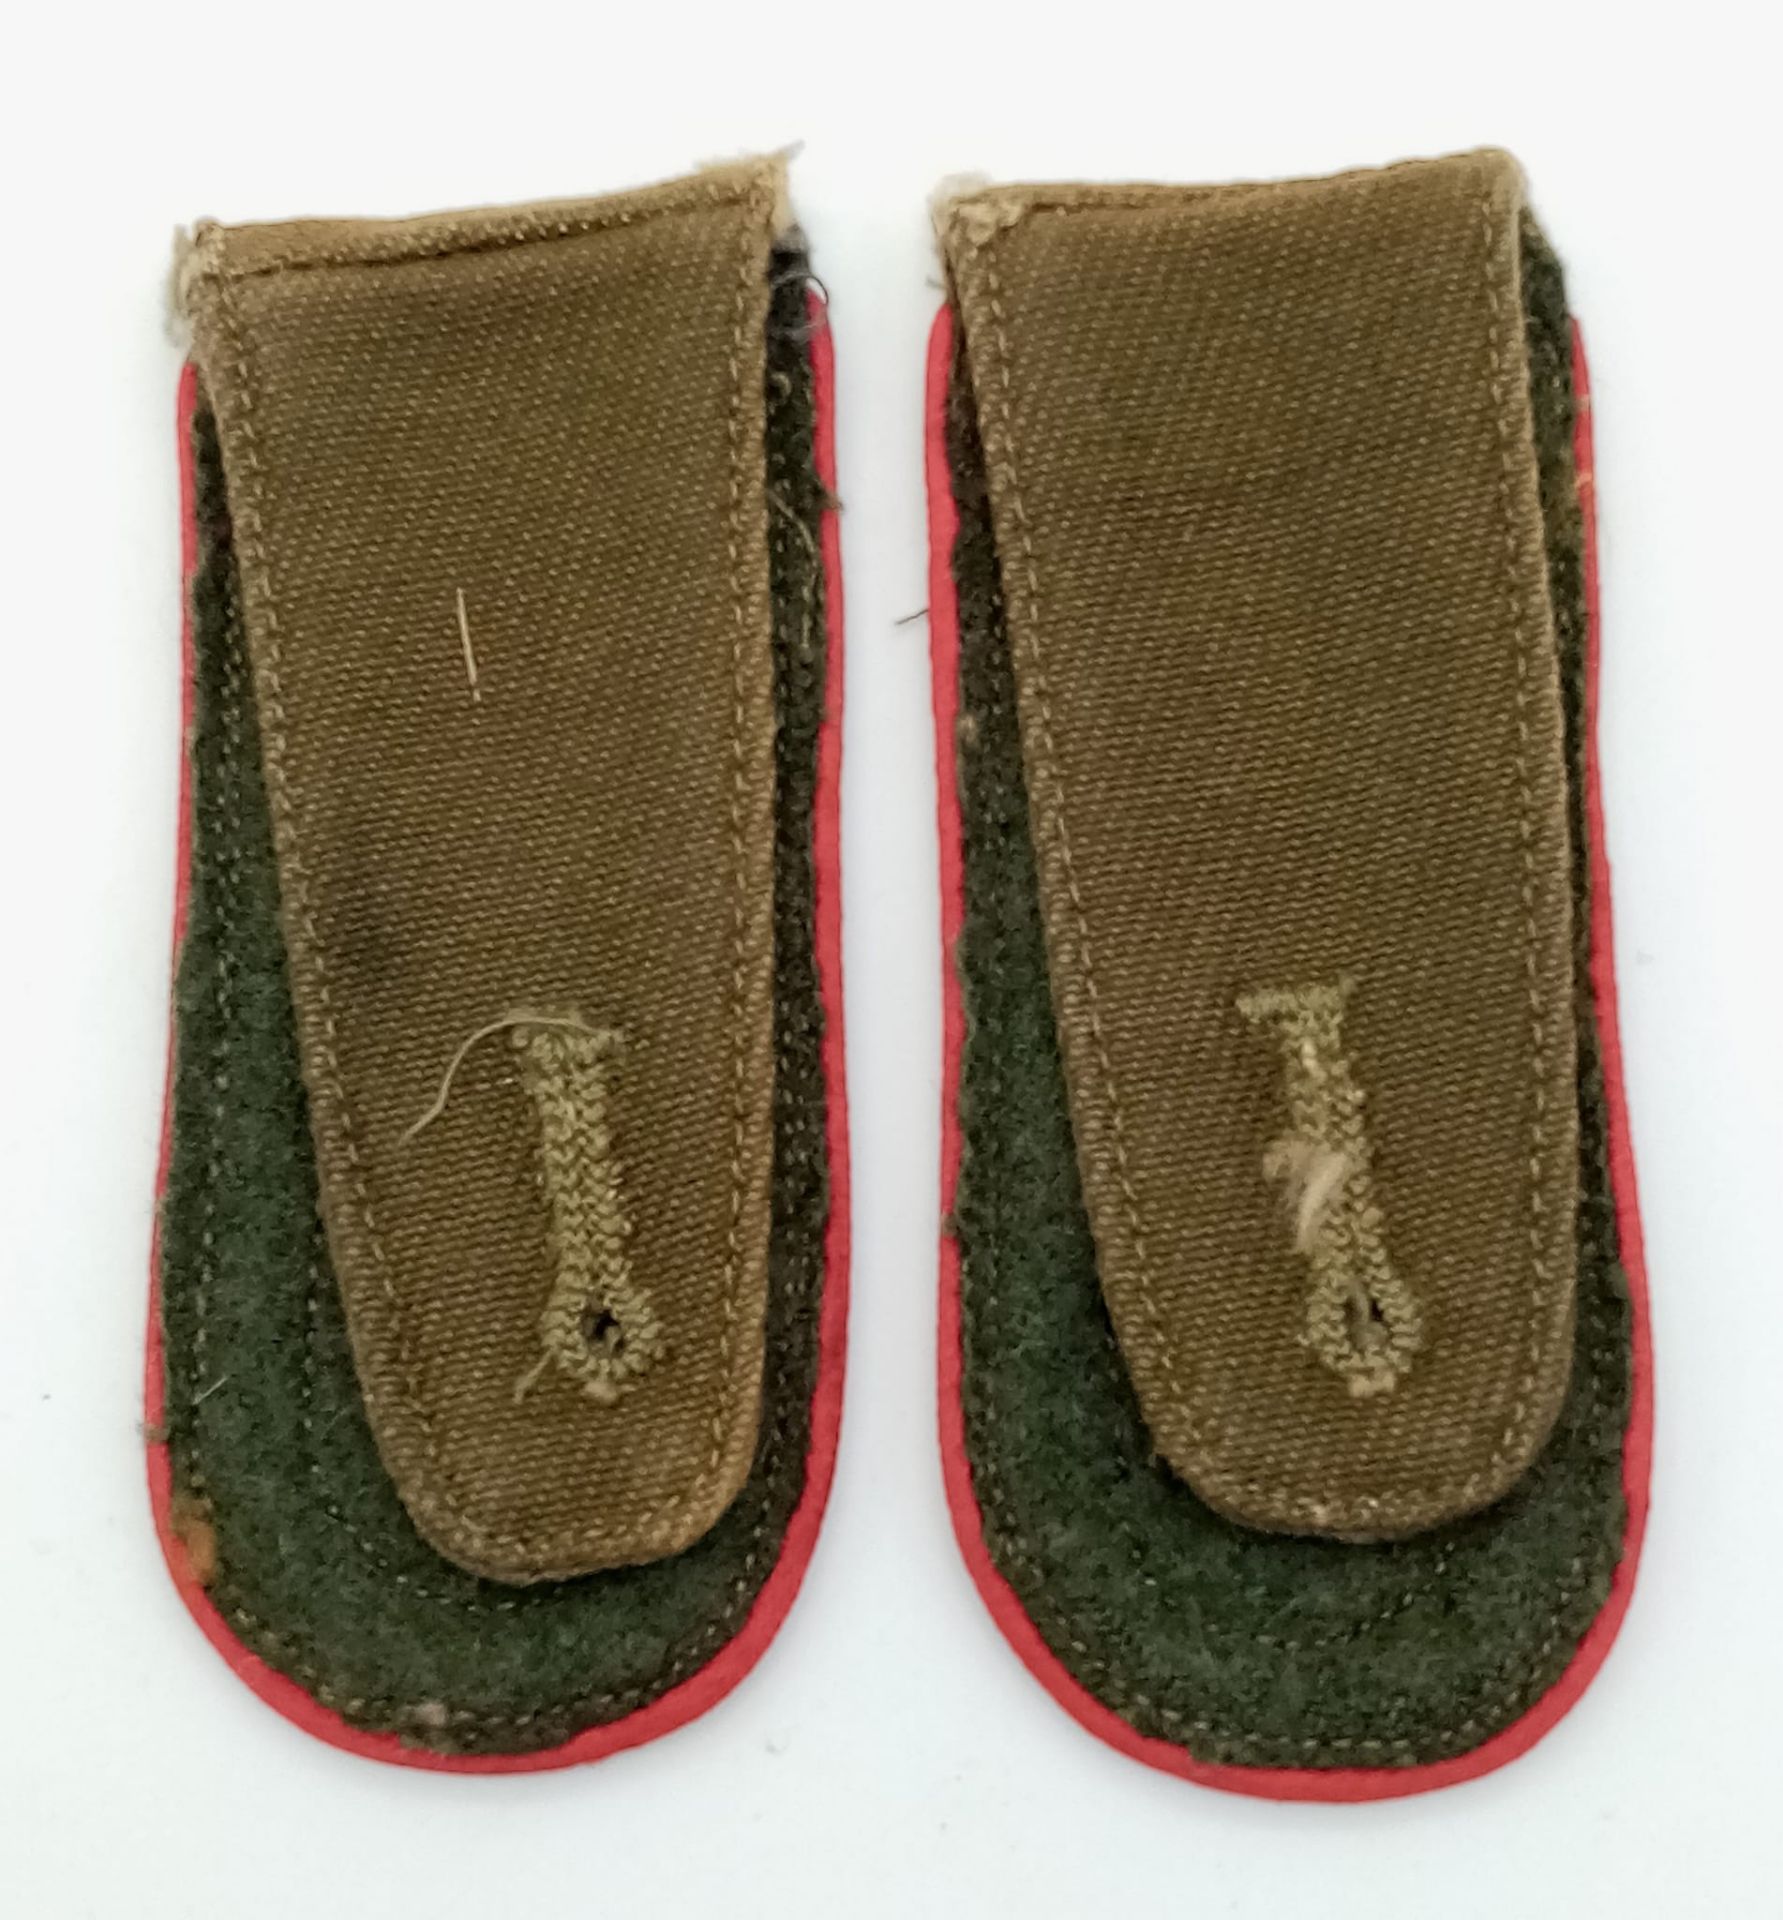 WW2 Africa Corps Shoulder Tabs with red piping for the artillery. Veteran Bring Back from Tobruk.